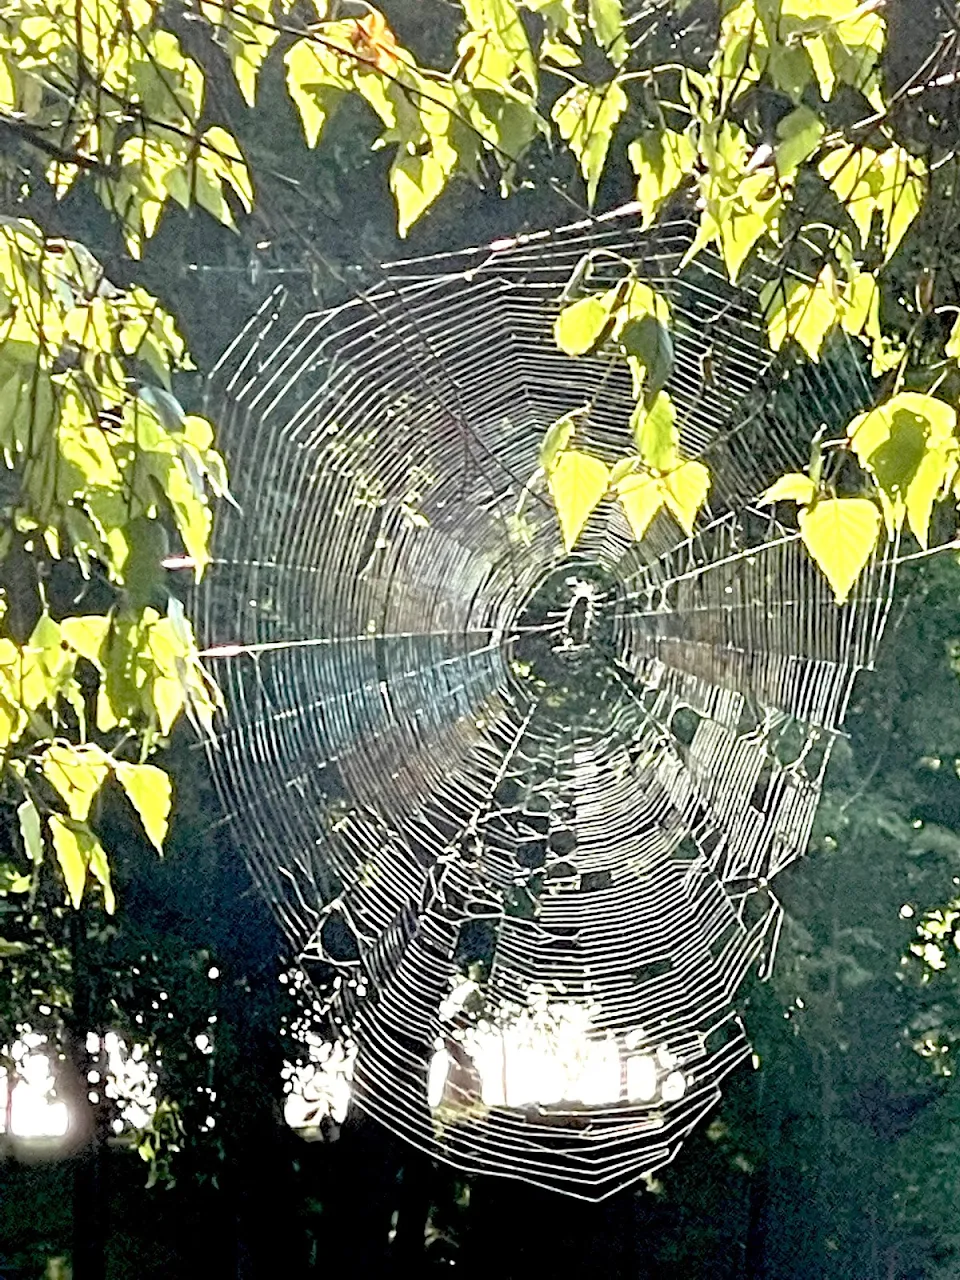 Well done Spider! You ate like royalty last night with a web like that!